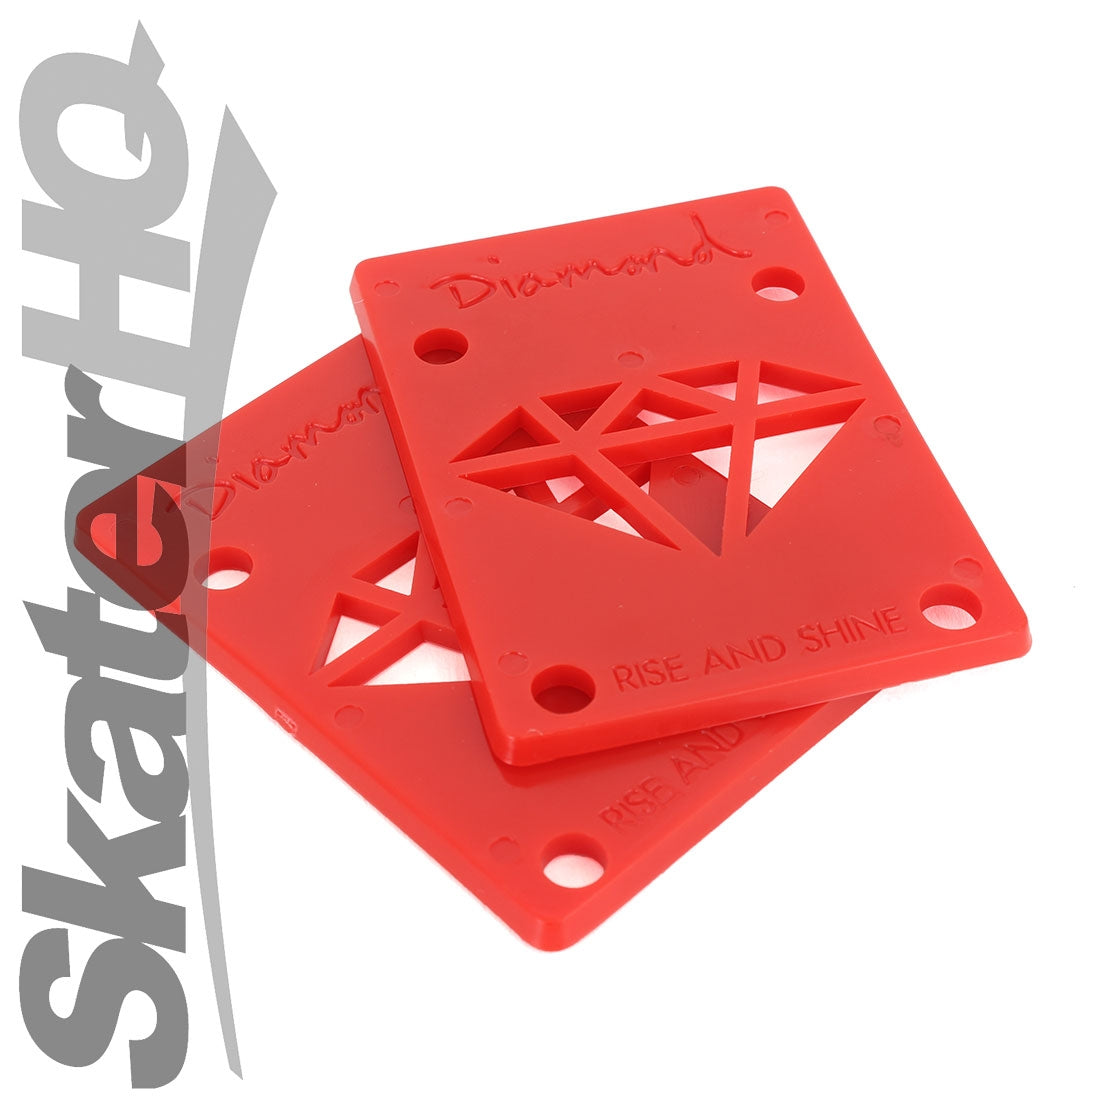 Diamond Riser Pads 1/8 Pair - Red Skateboard Hardware and Parts